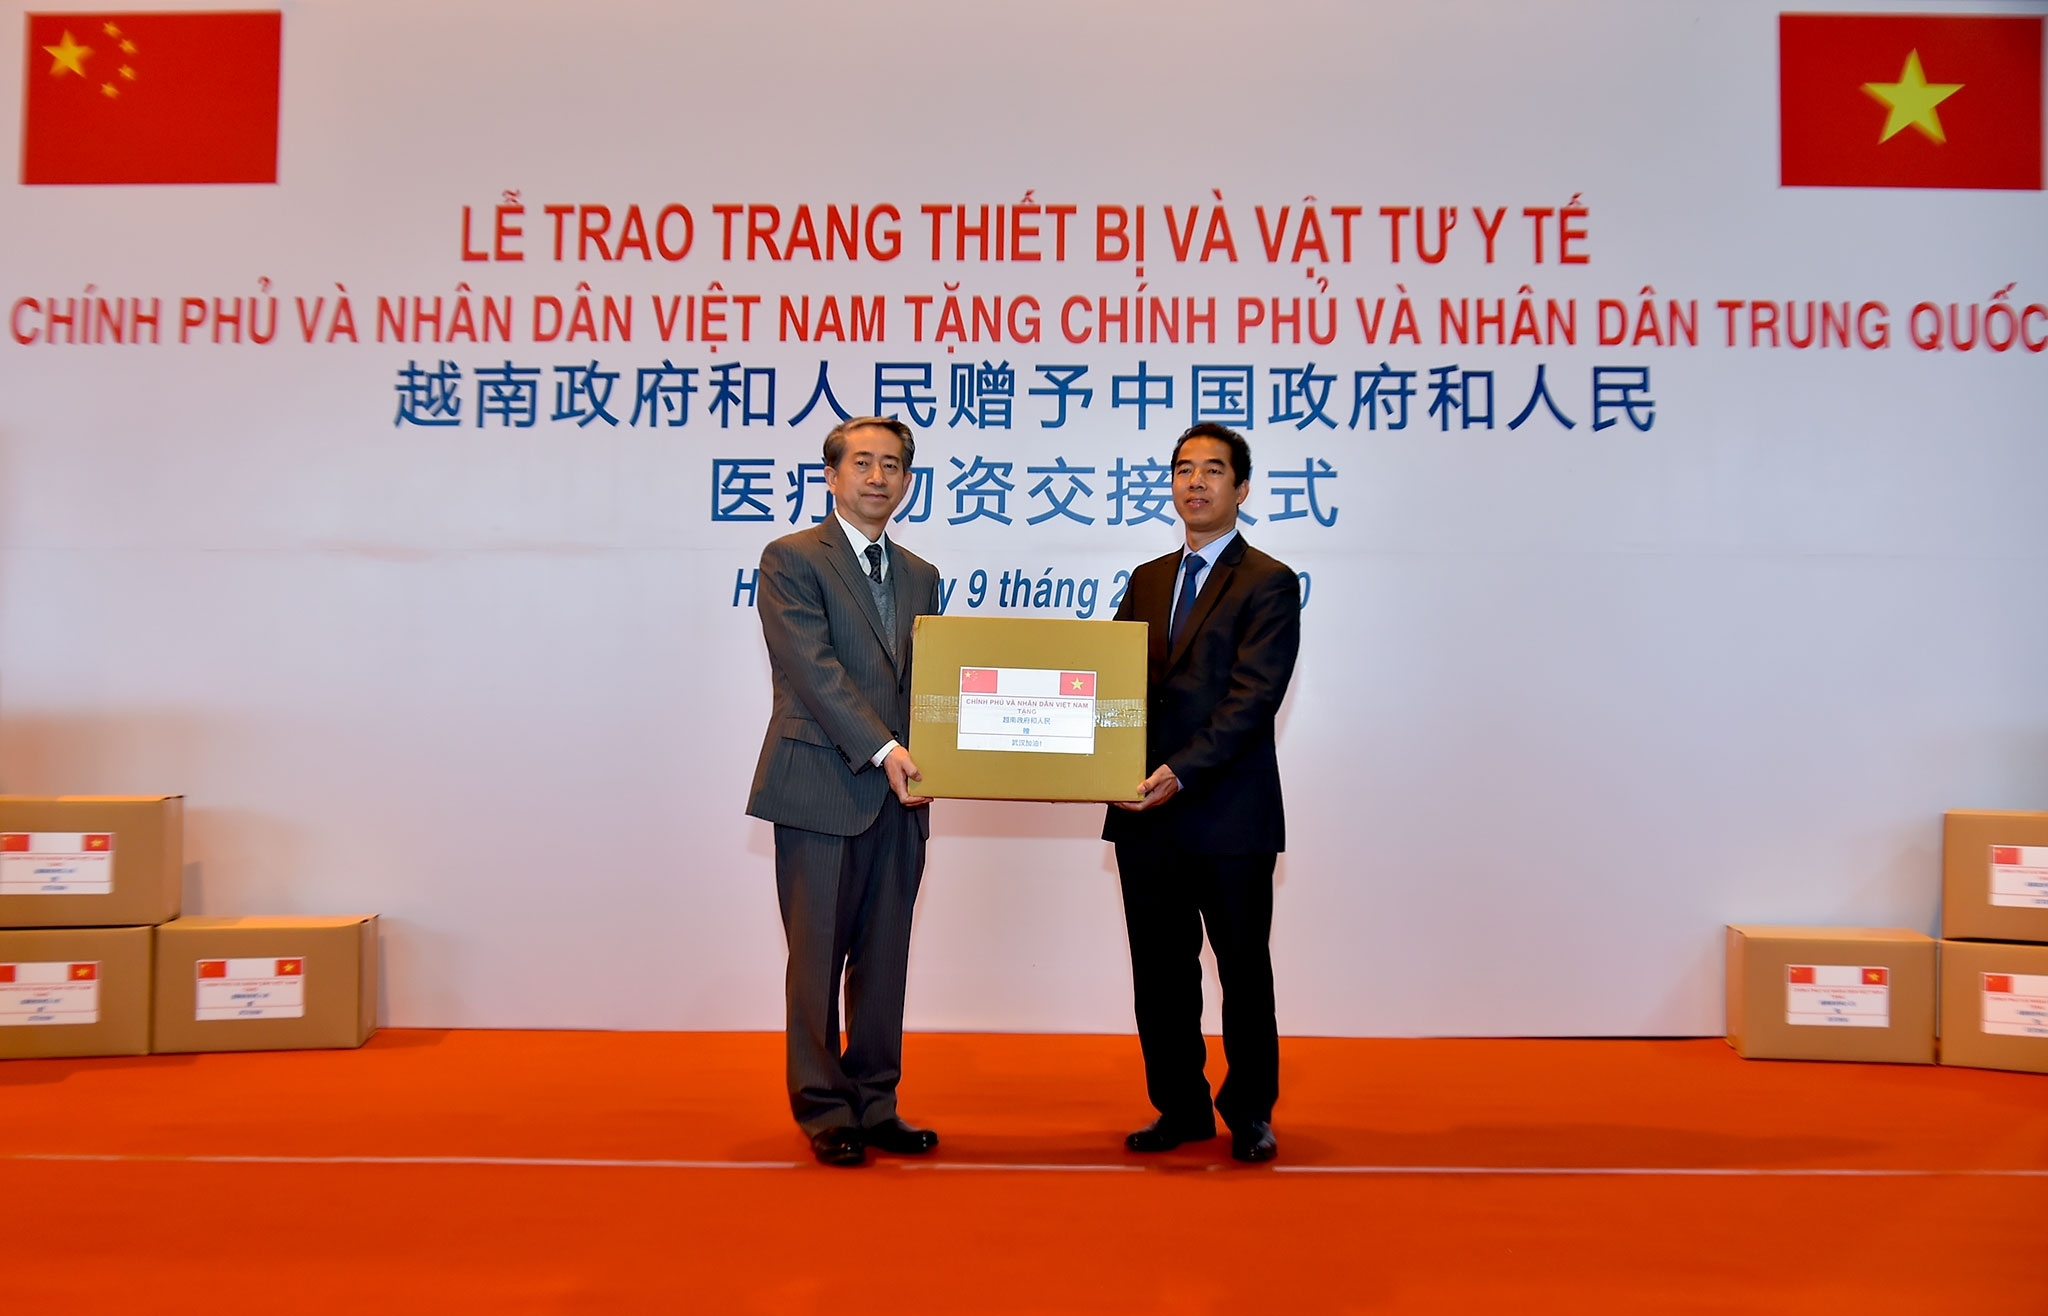 VN hands over medical equipment to China for nCoV combat